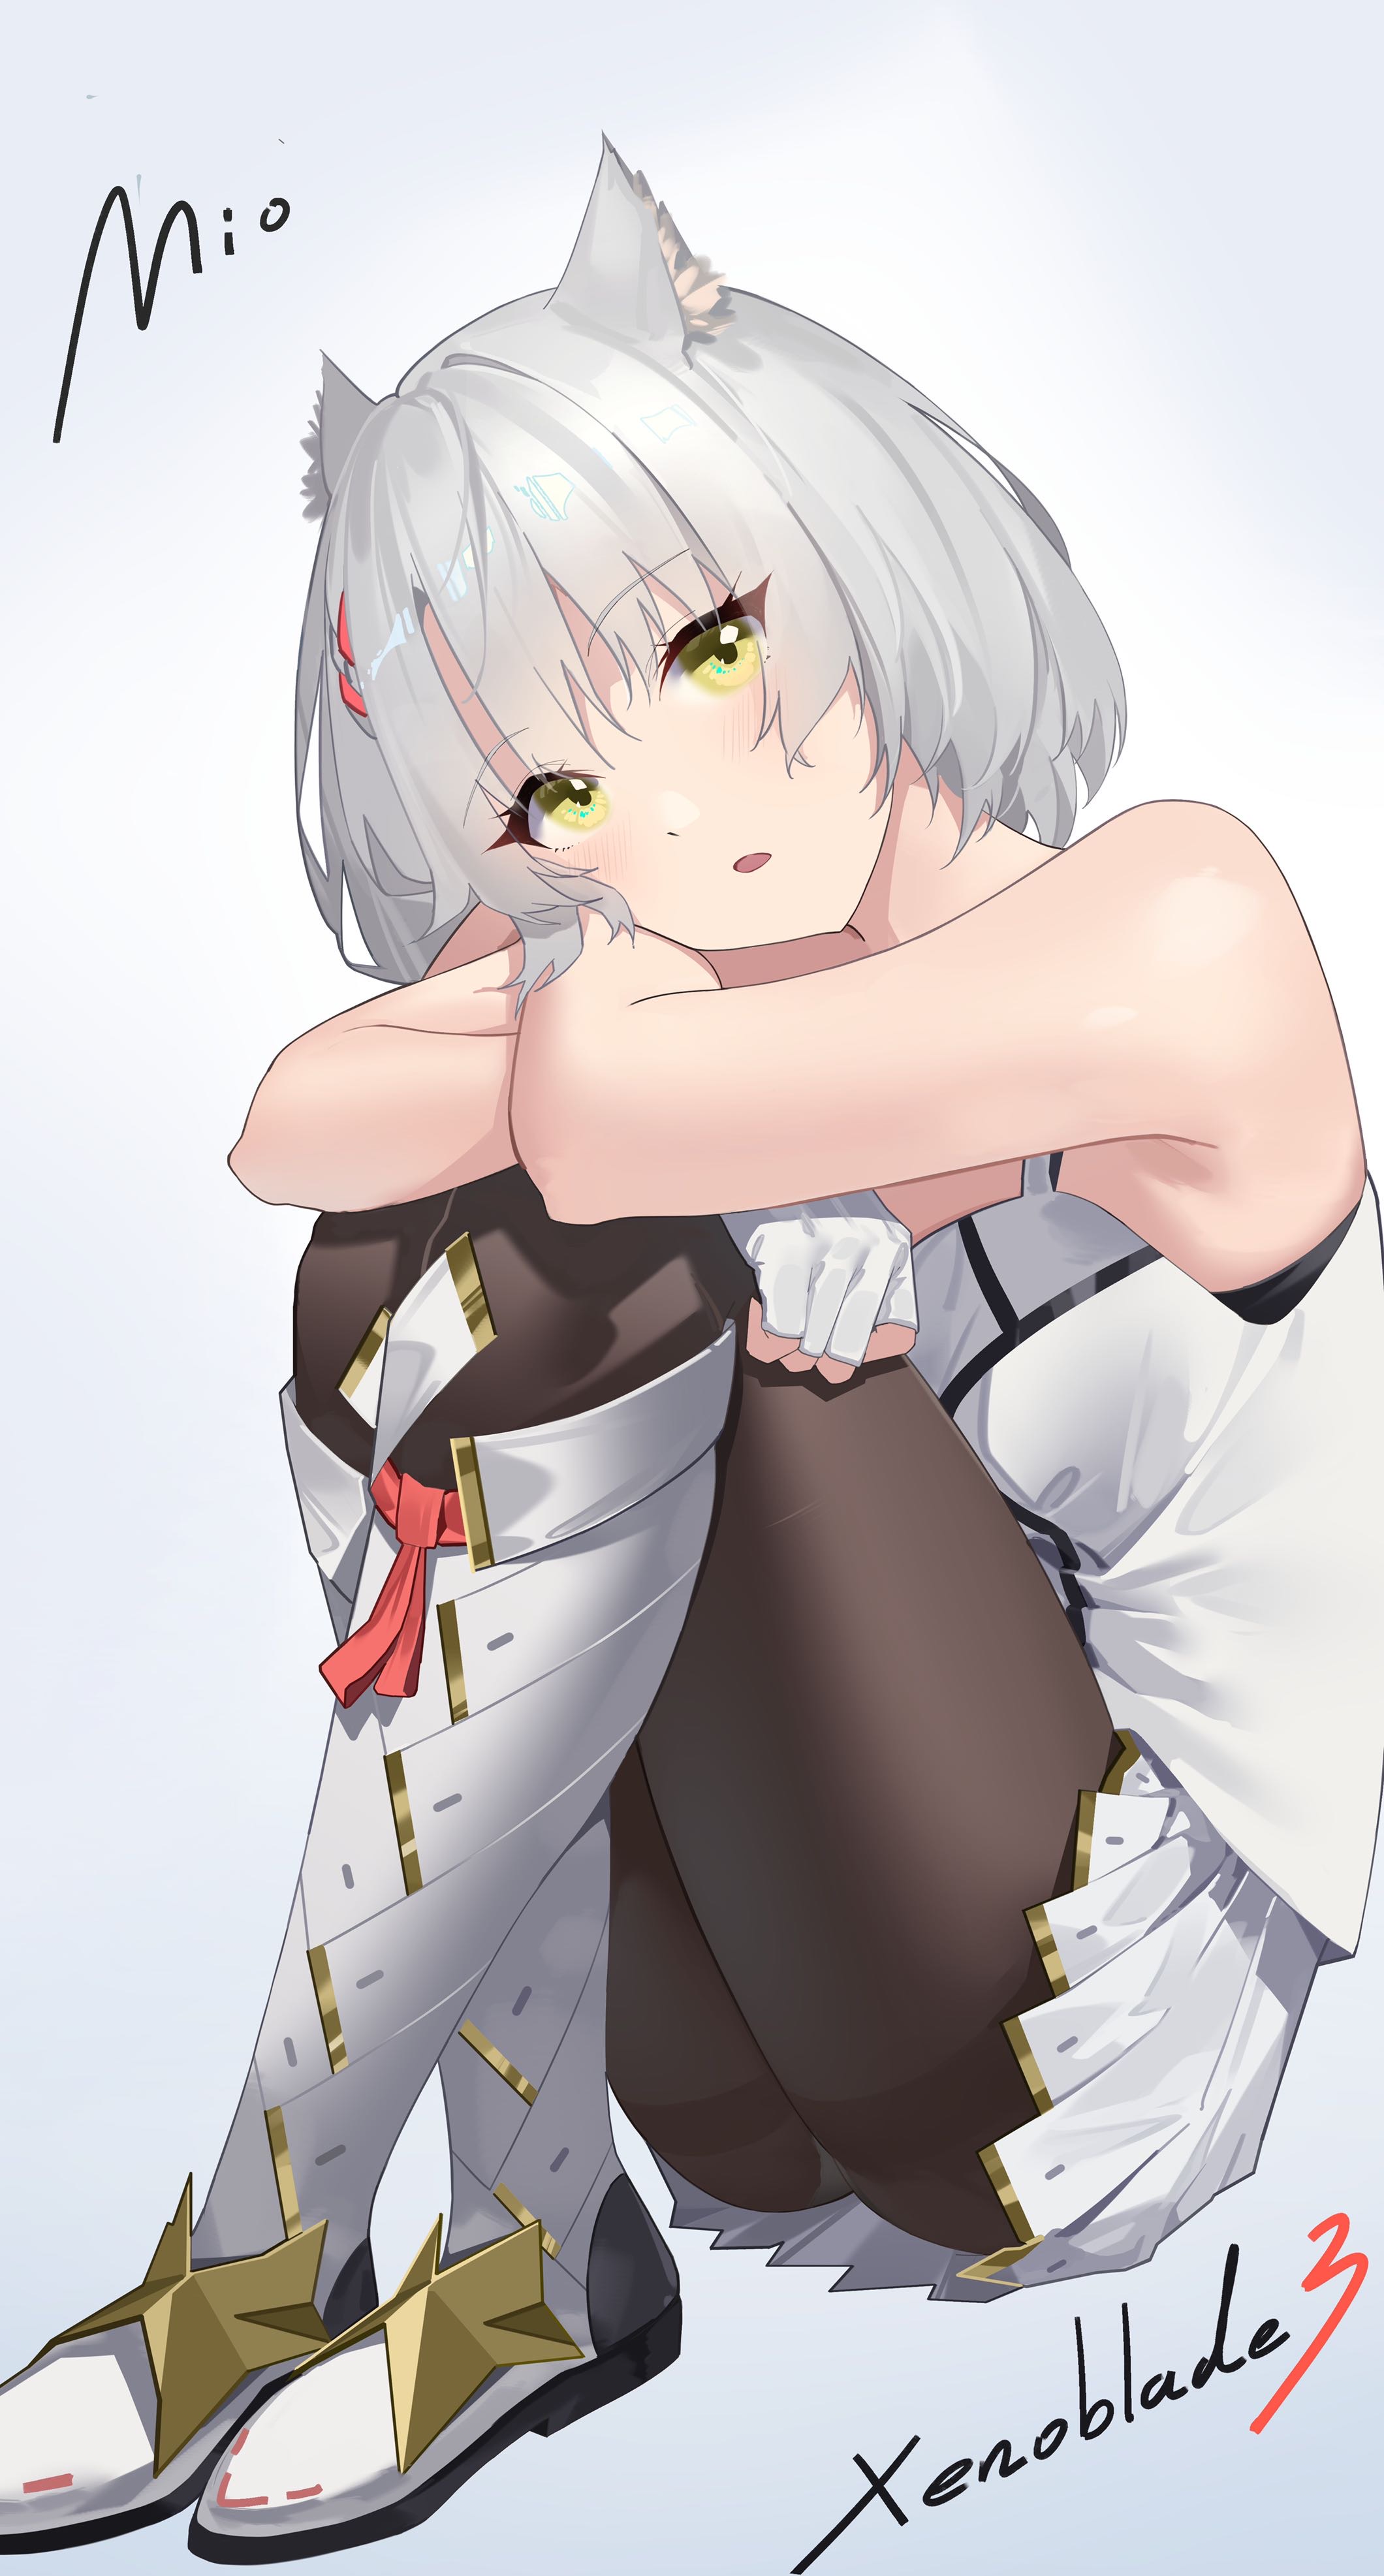 Anime 2120x3946 Xenoblade Chronicles 3 Mio (Xenoblade 3) cat girl Ray (artist) anime Pixiv anime girls animal ears thighs looking at viewer shoulder length hair gray hair white background simple background thighs together pantyhose black pantyhose boots anime games video games fan art video game girls